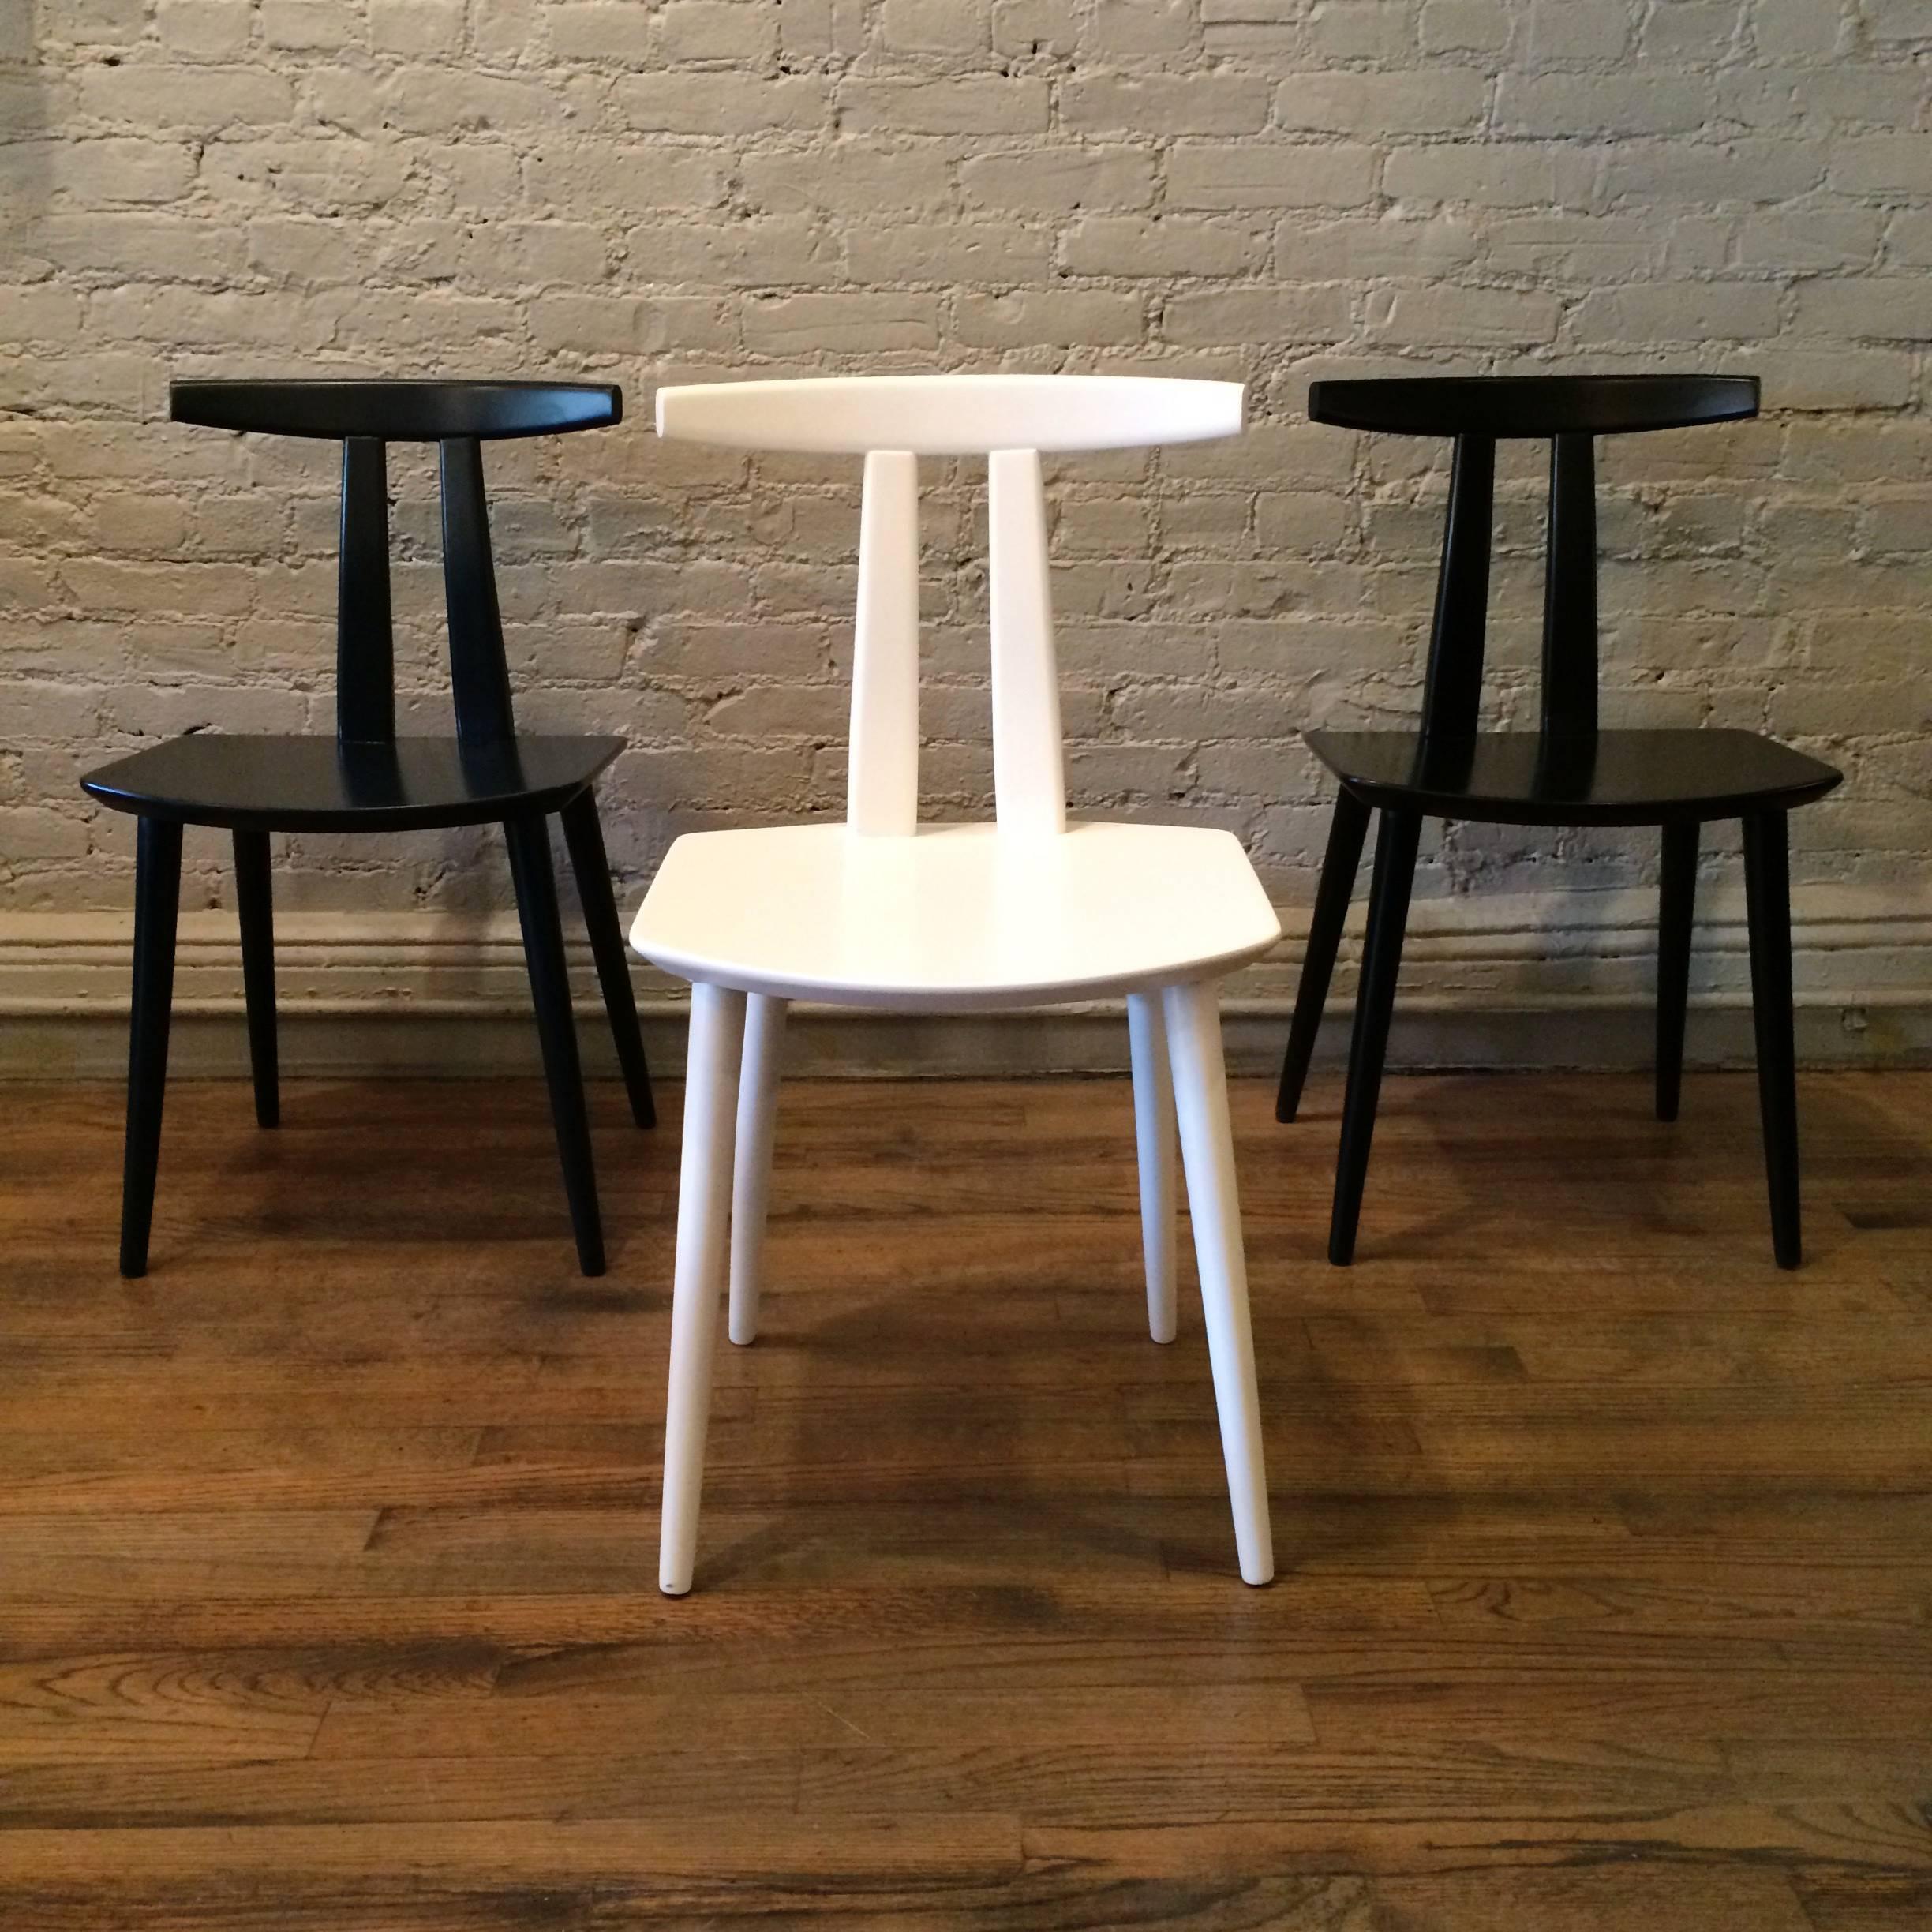 Set of three Danish modern, birch side chairs lacquered in black, white and blue by Folke Palsson for FDB Mobler.